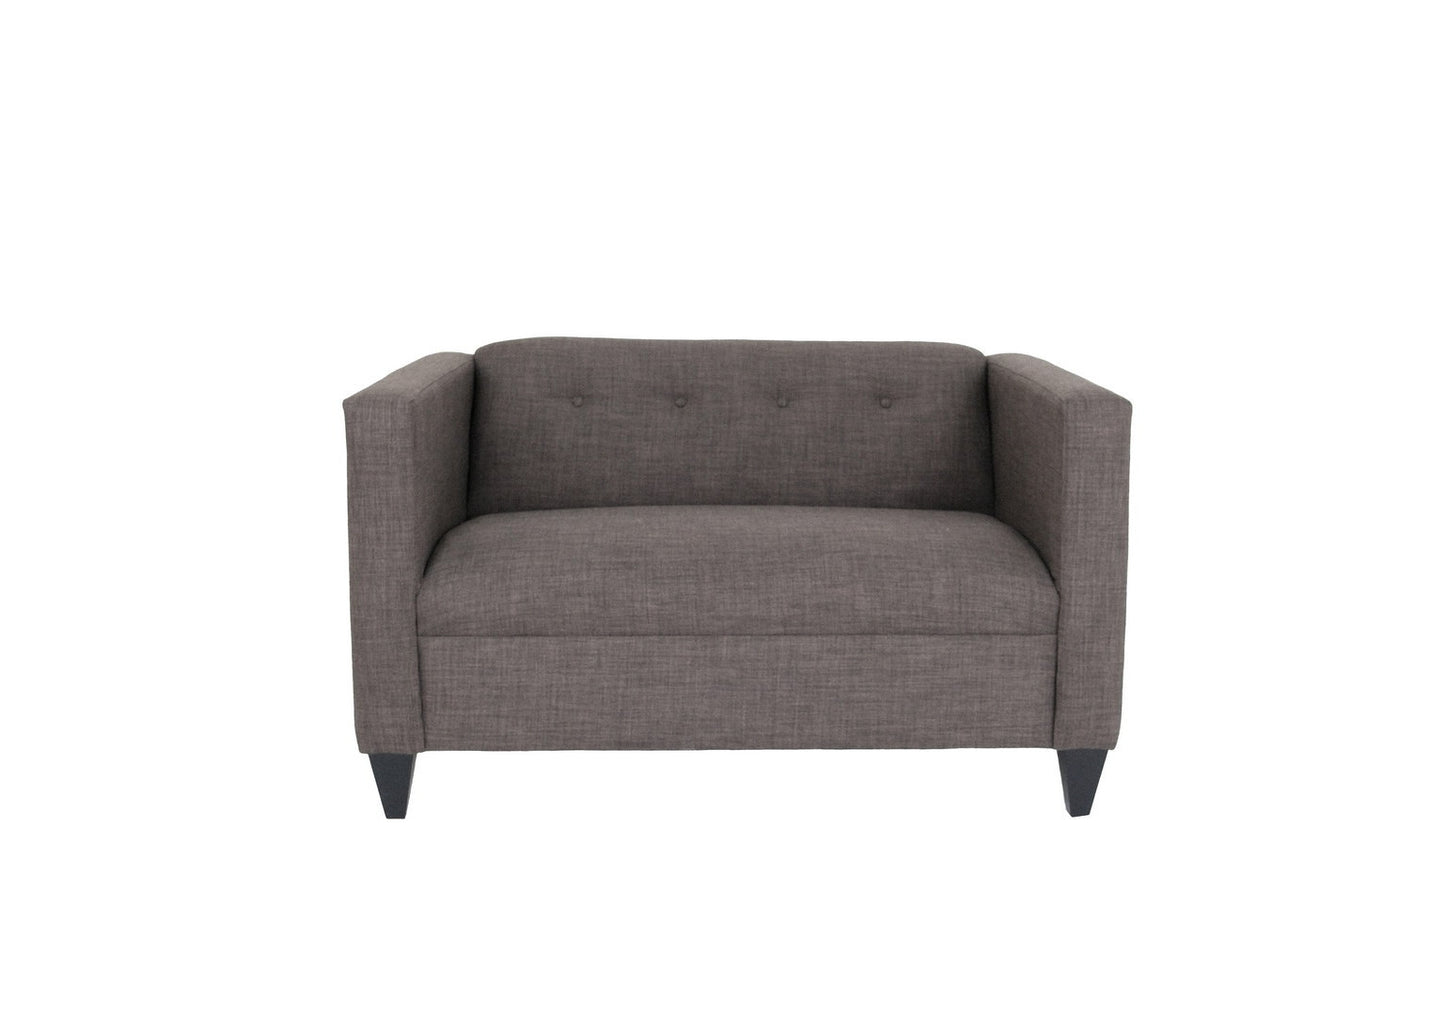 50" Charcoal and Dark Brown Polyester Blend Love Seat